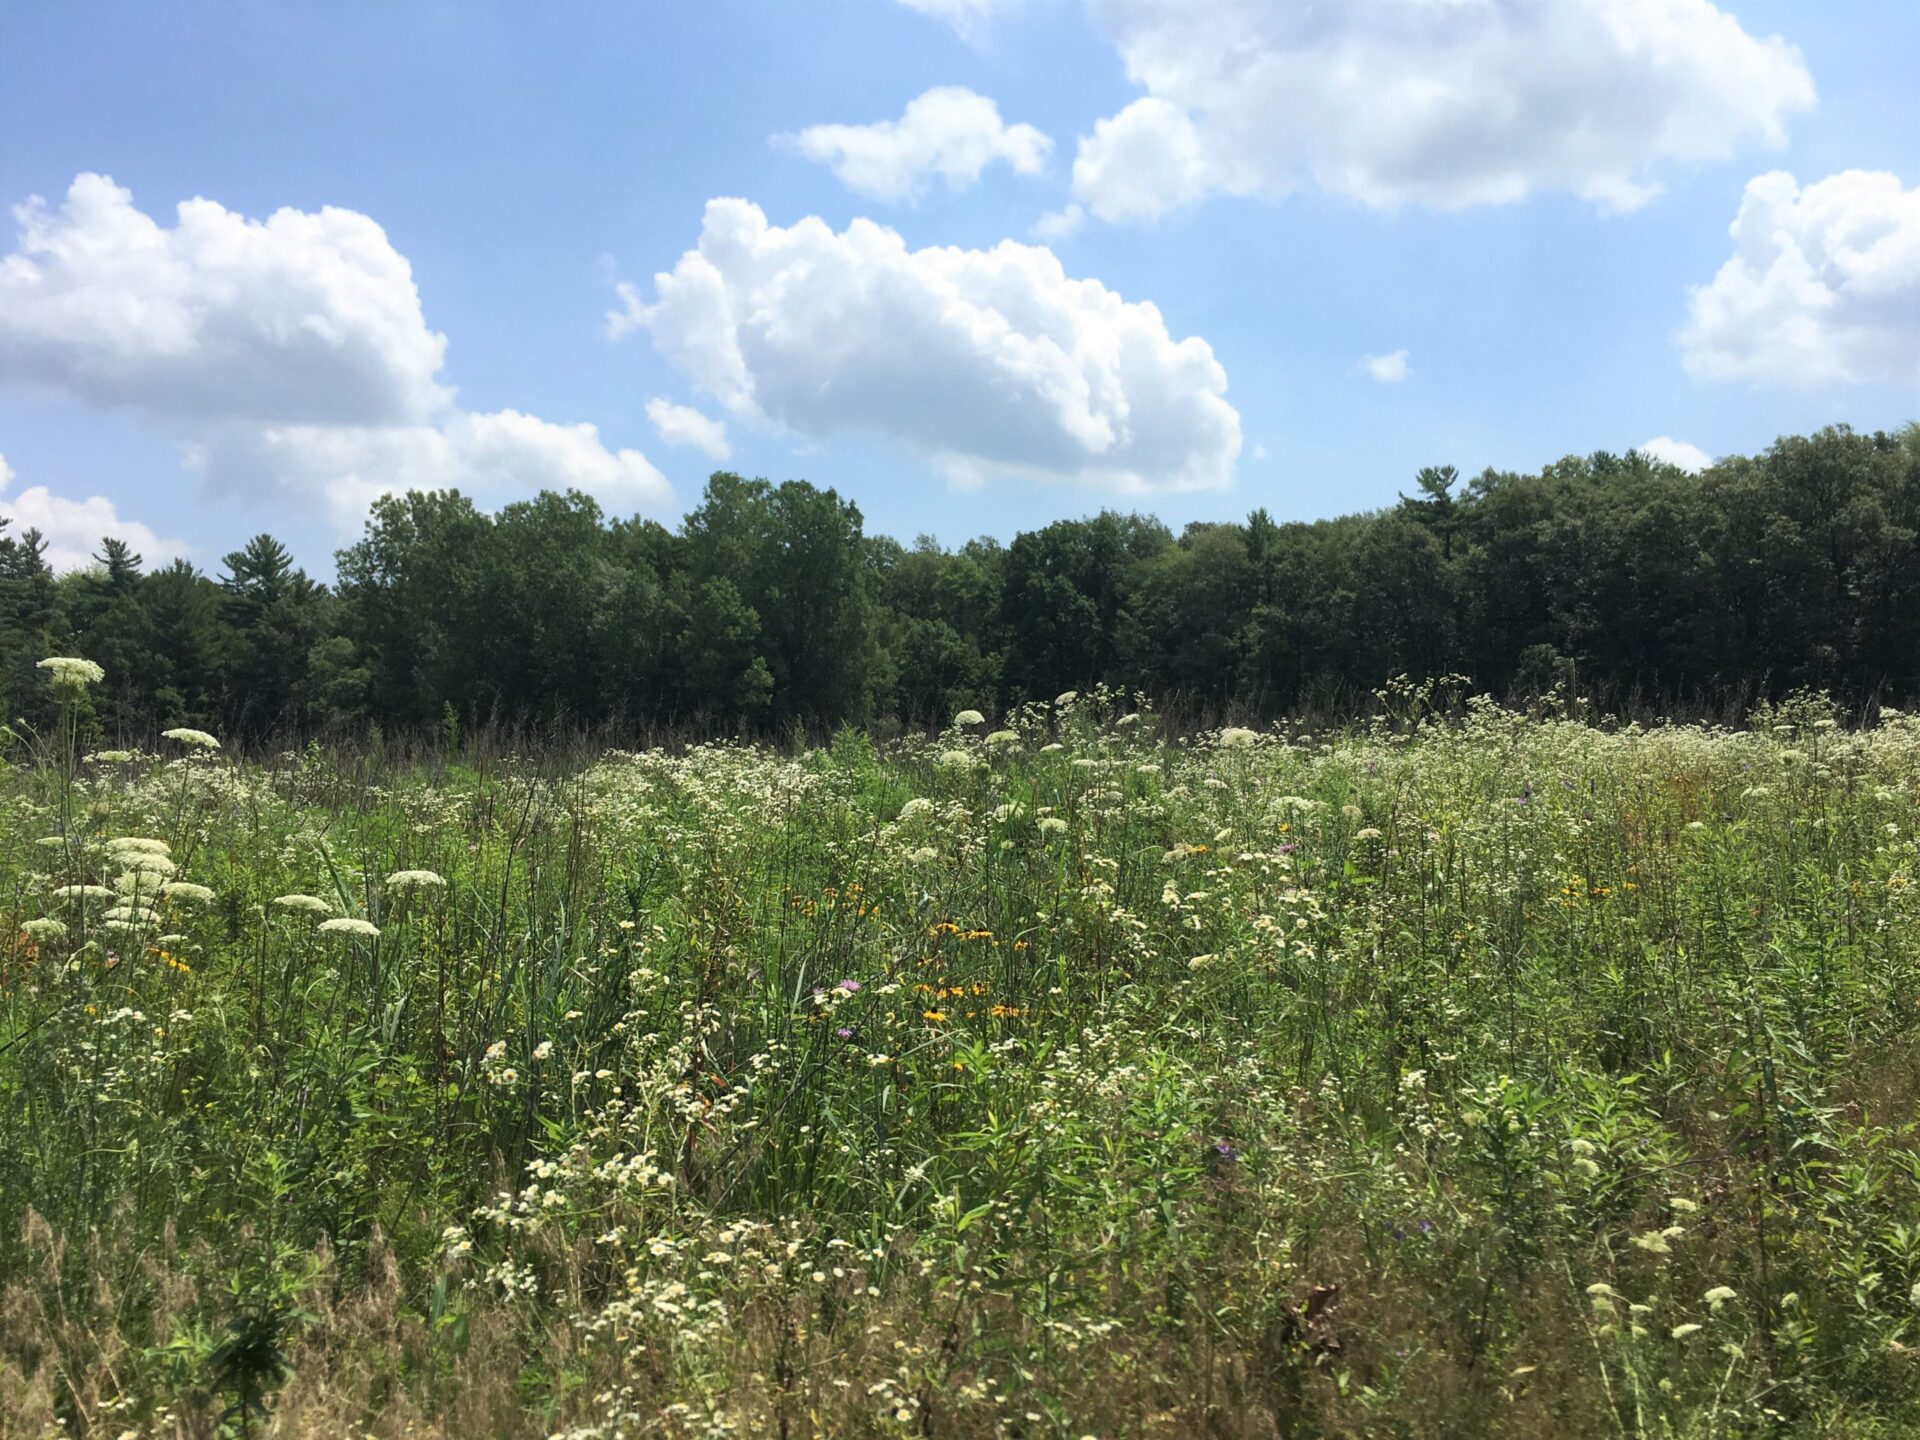 Wildflowers were planted among the Tallgrass prairie and trees.